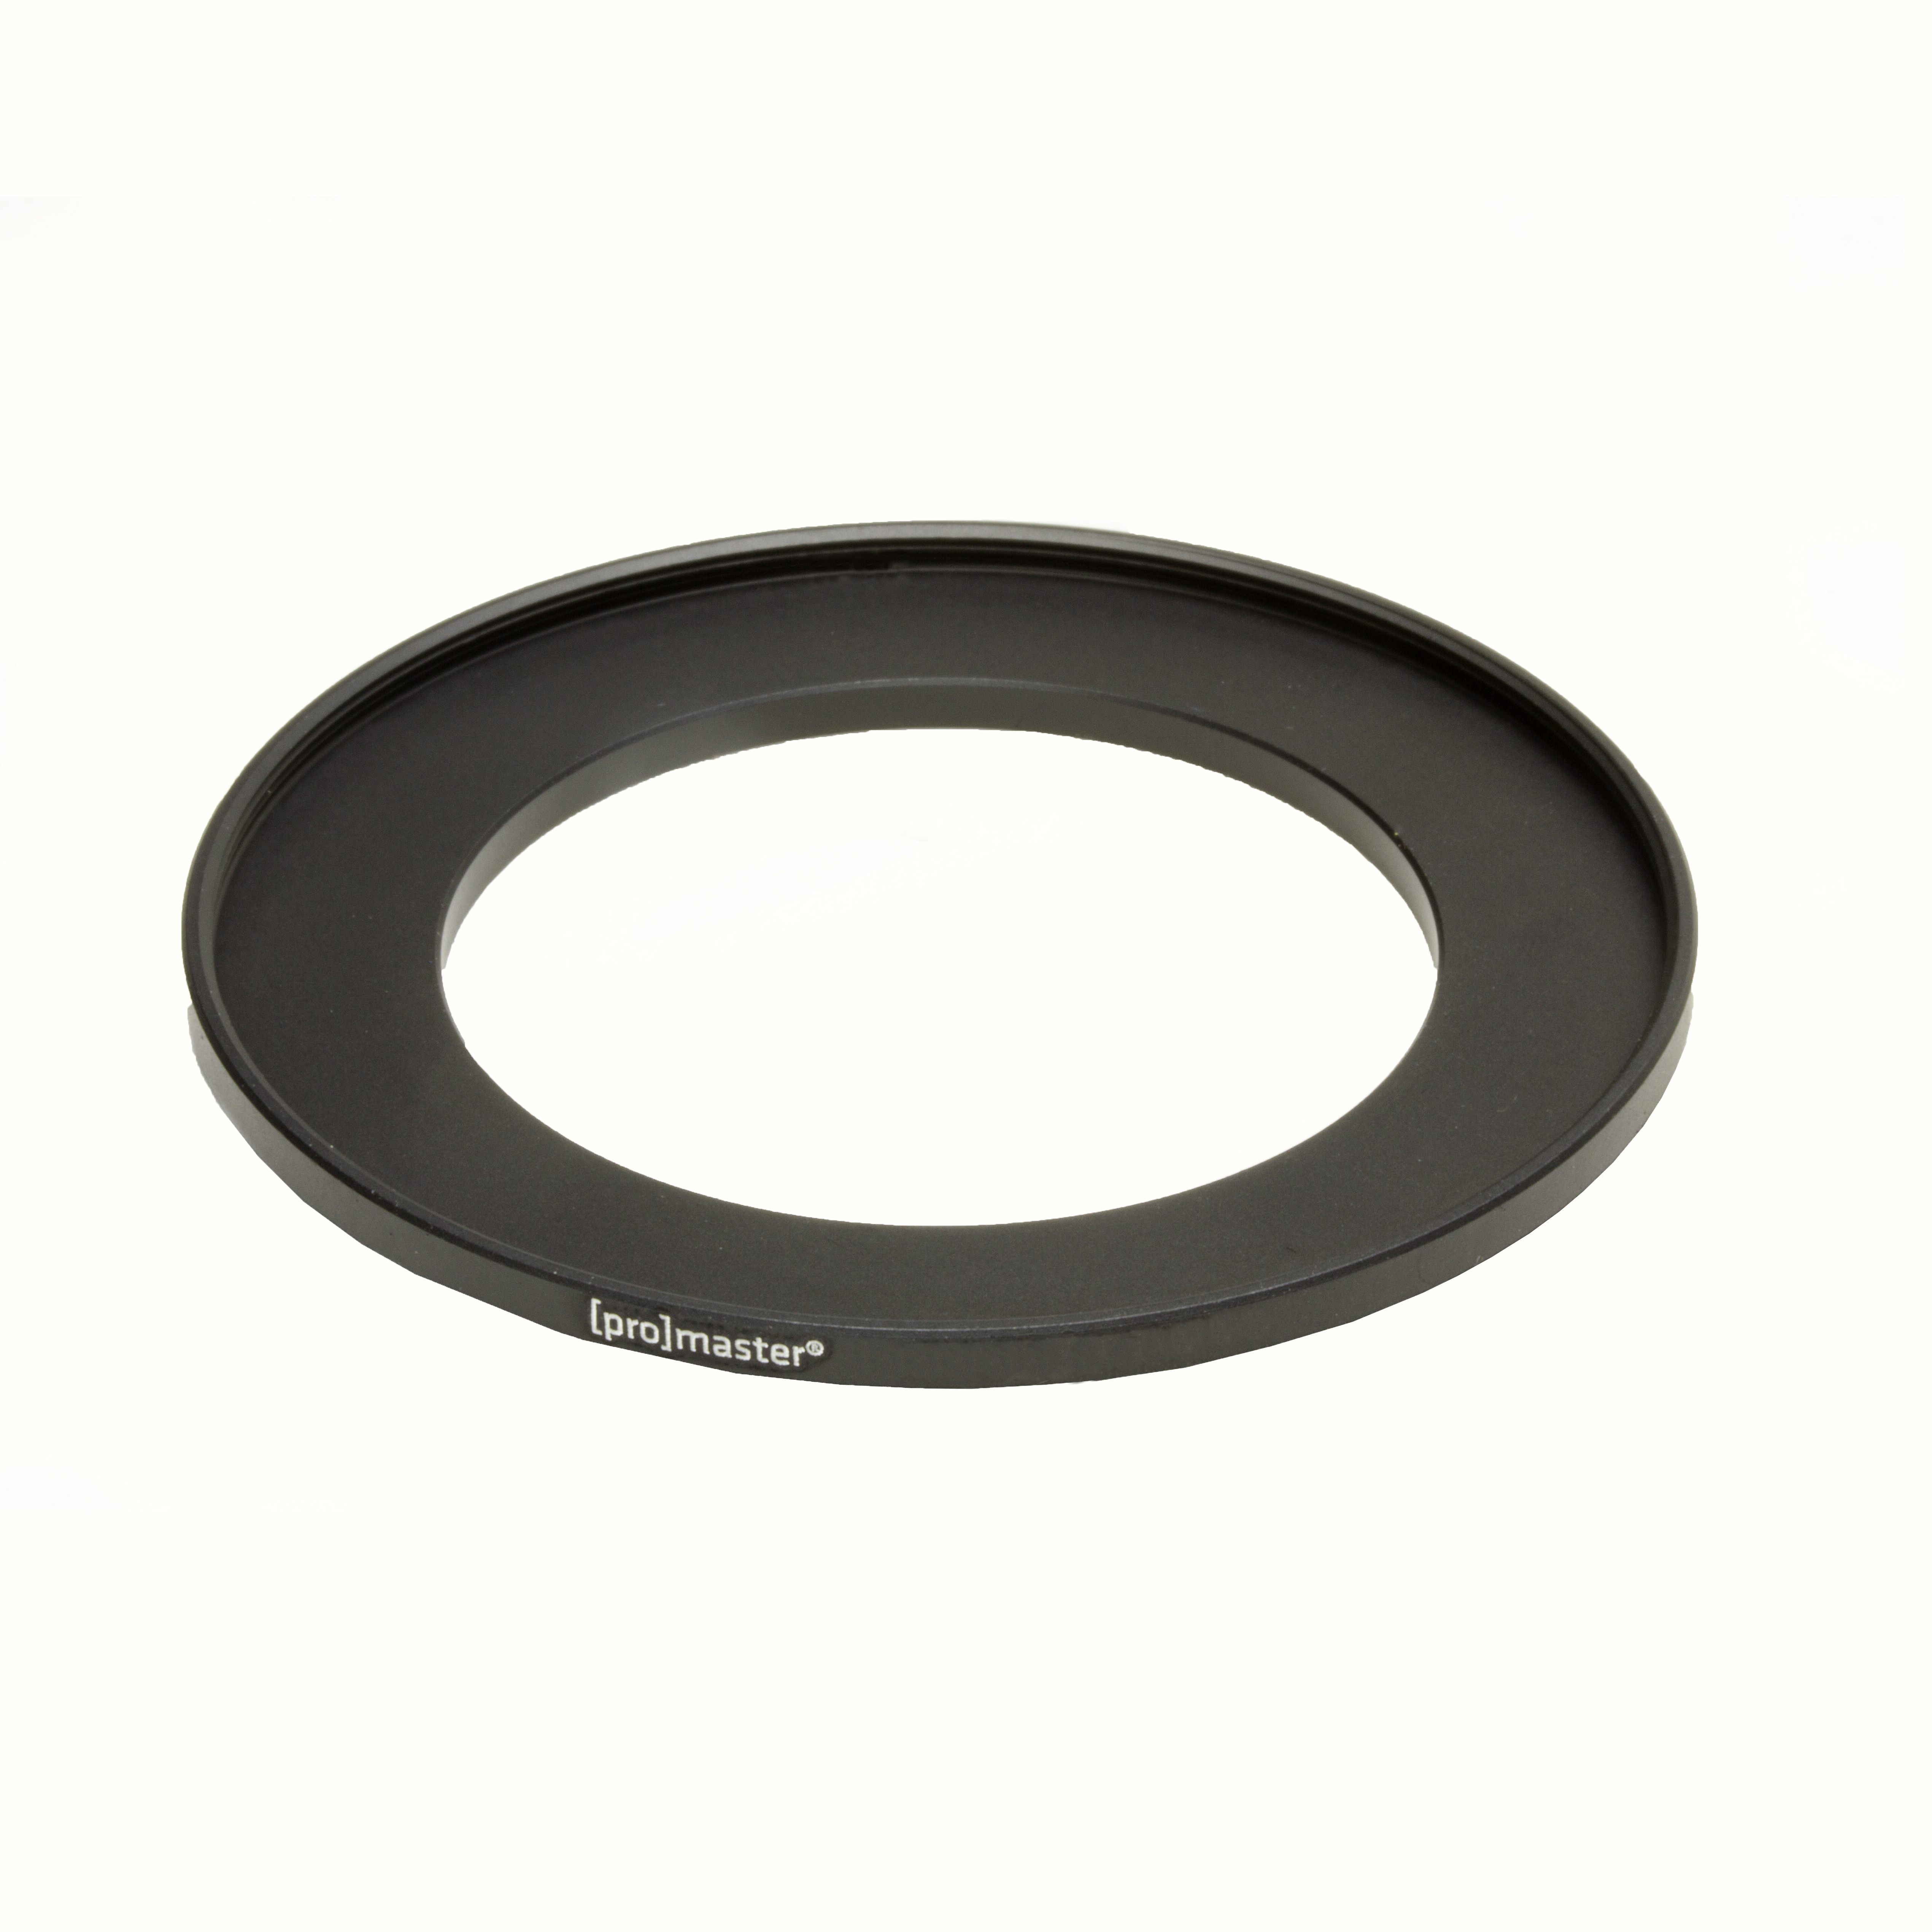 Promaster 7302 58-77mm Step-Up Ring